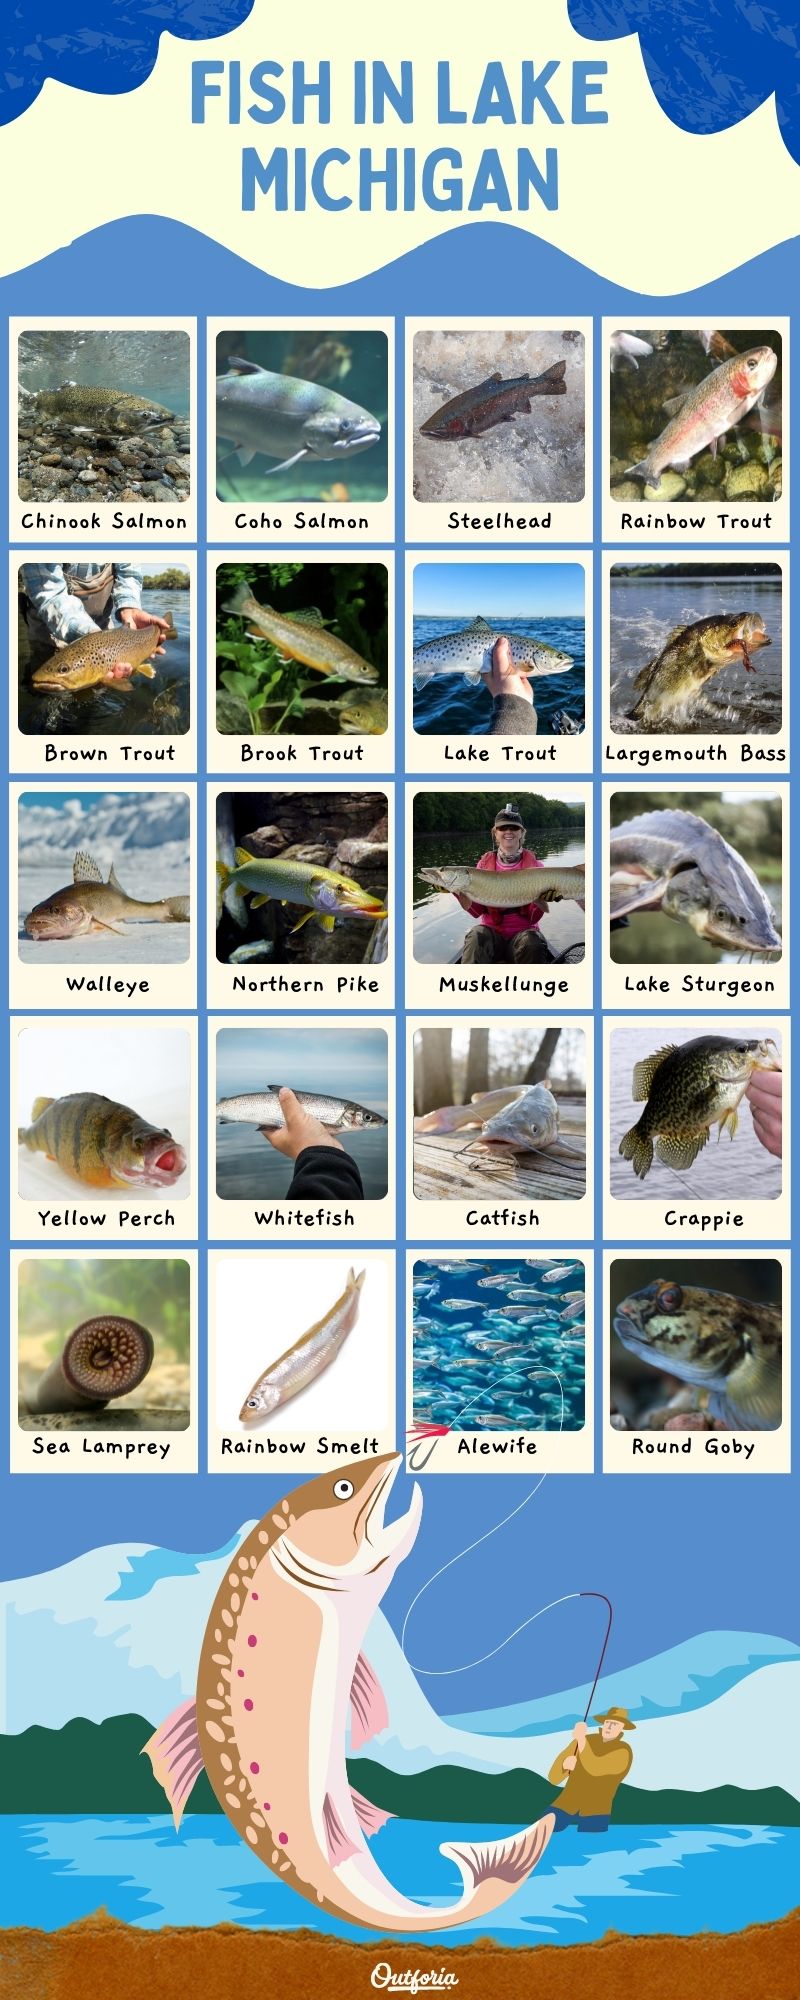 chart of the fish in Lake Michigan with images and names